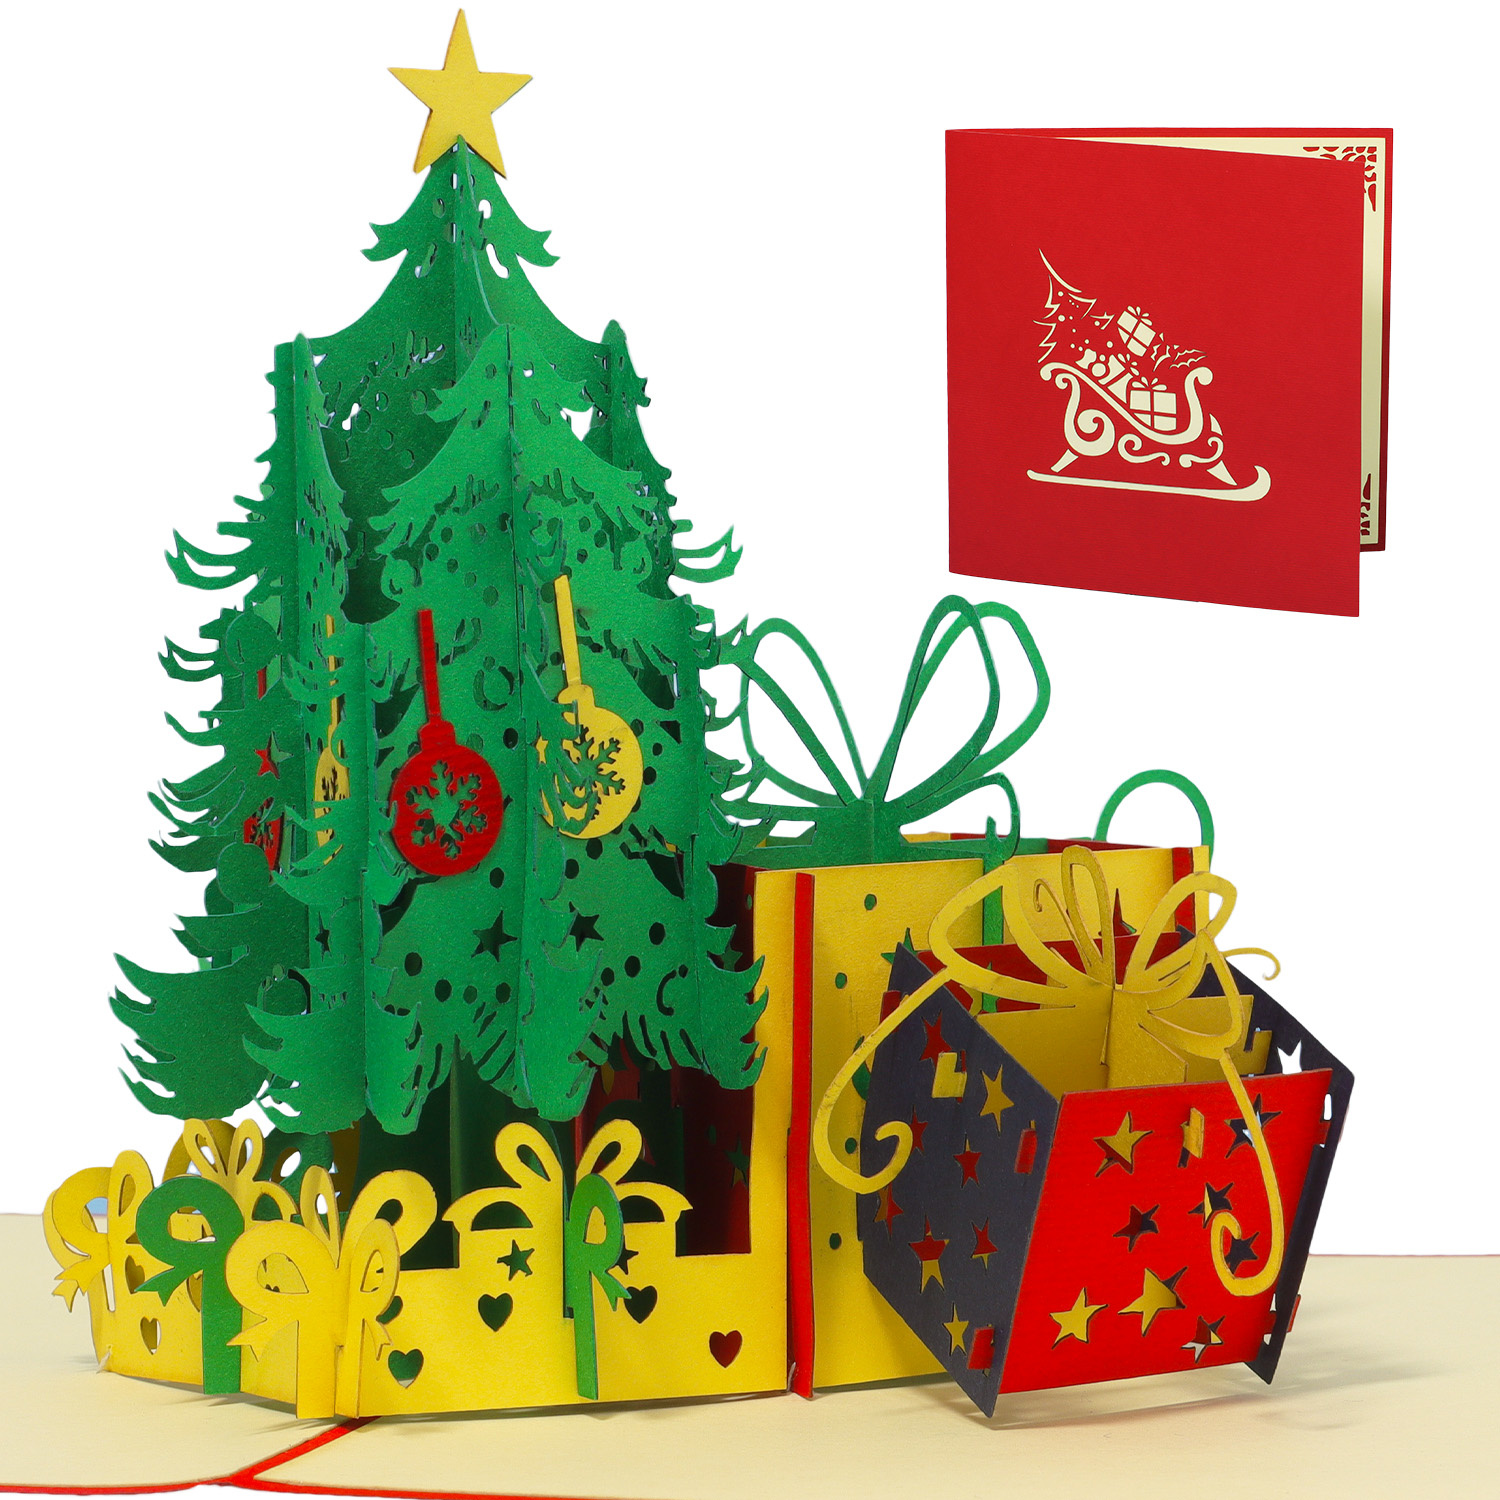 LINPOPUP Pop Up 3D Card, Christmas Card, Greeting Card, Fir Tree, Christmas Tree with Gifts, LIN17563, LINPopUp®, N453